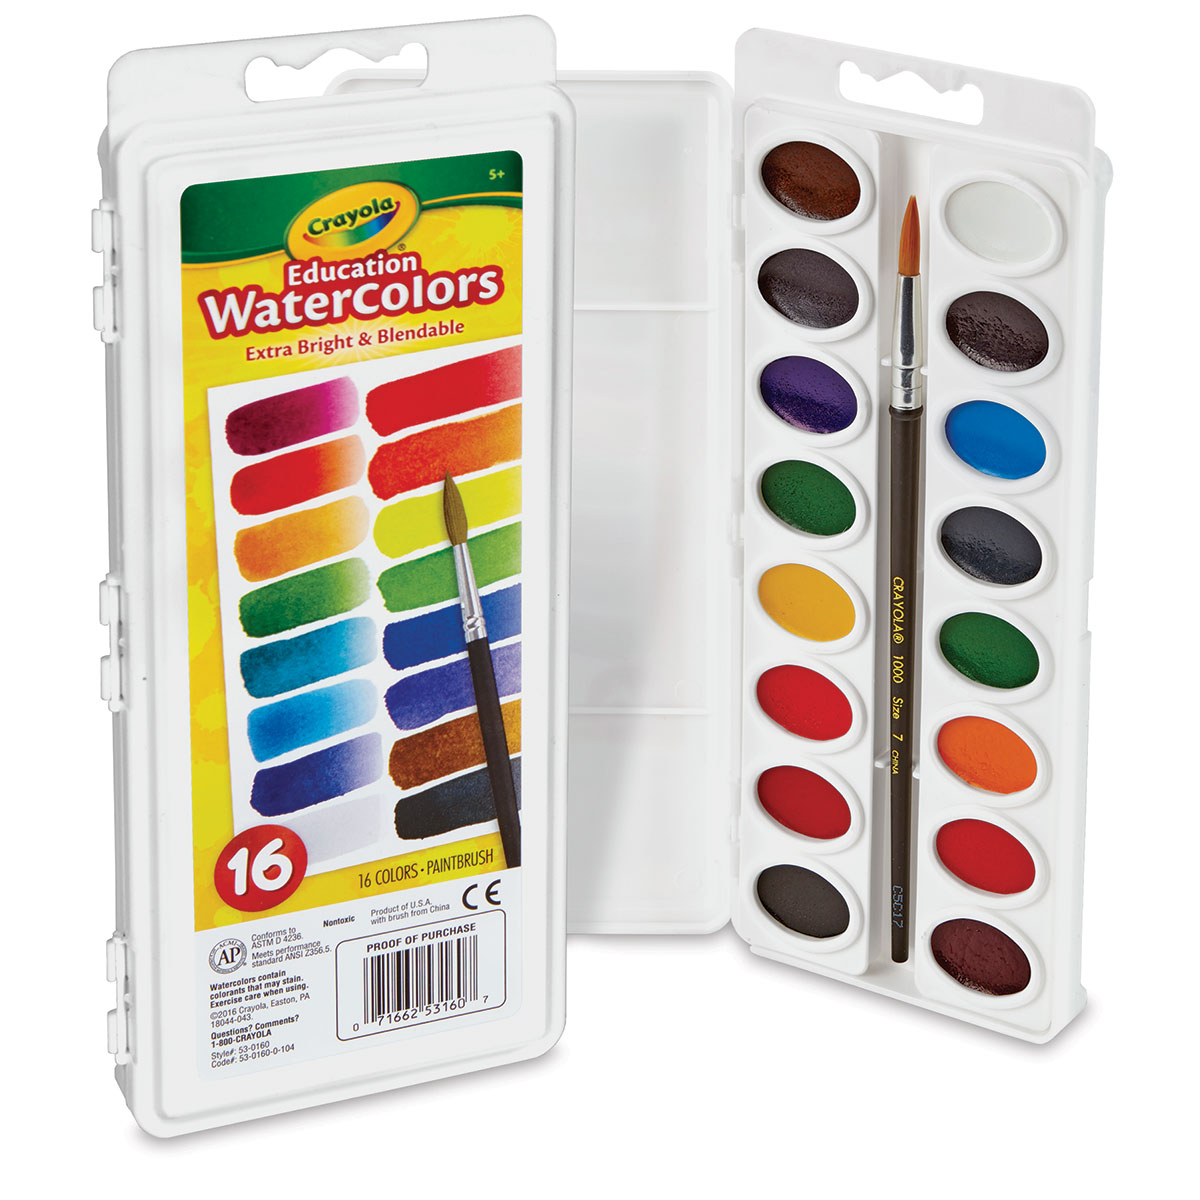 COLOUR BLOCK 32 Ultimate Watercolor Paint Set for Adults and Artists,  Contains 2